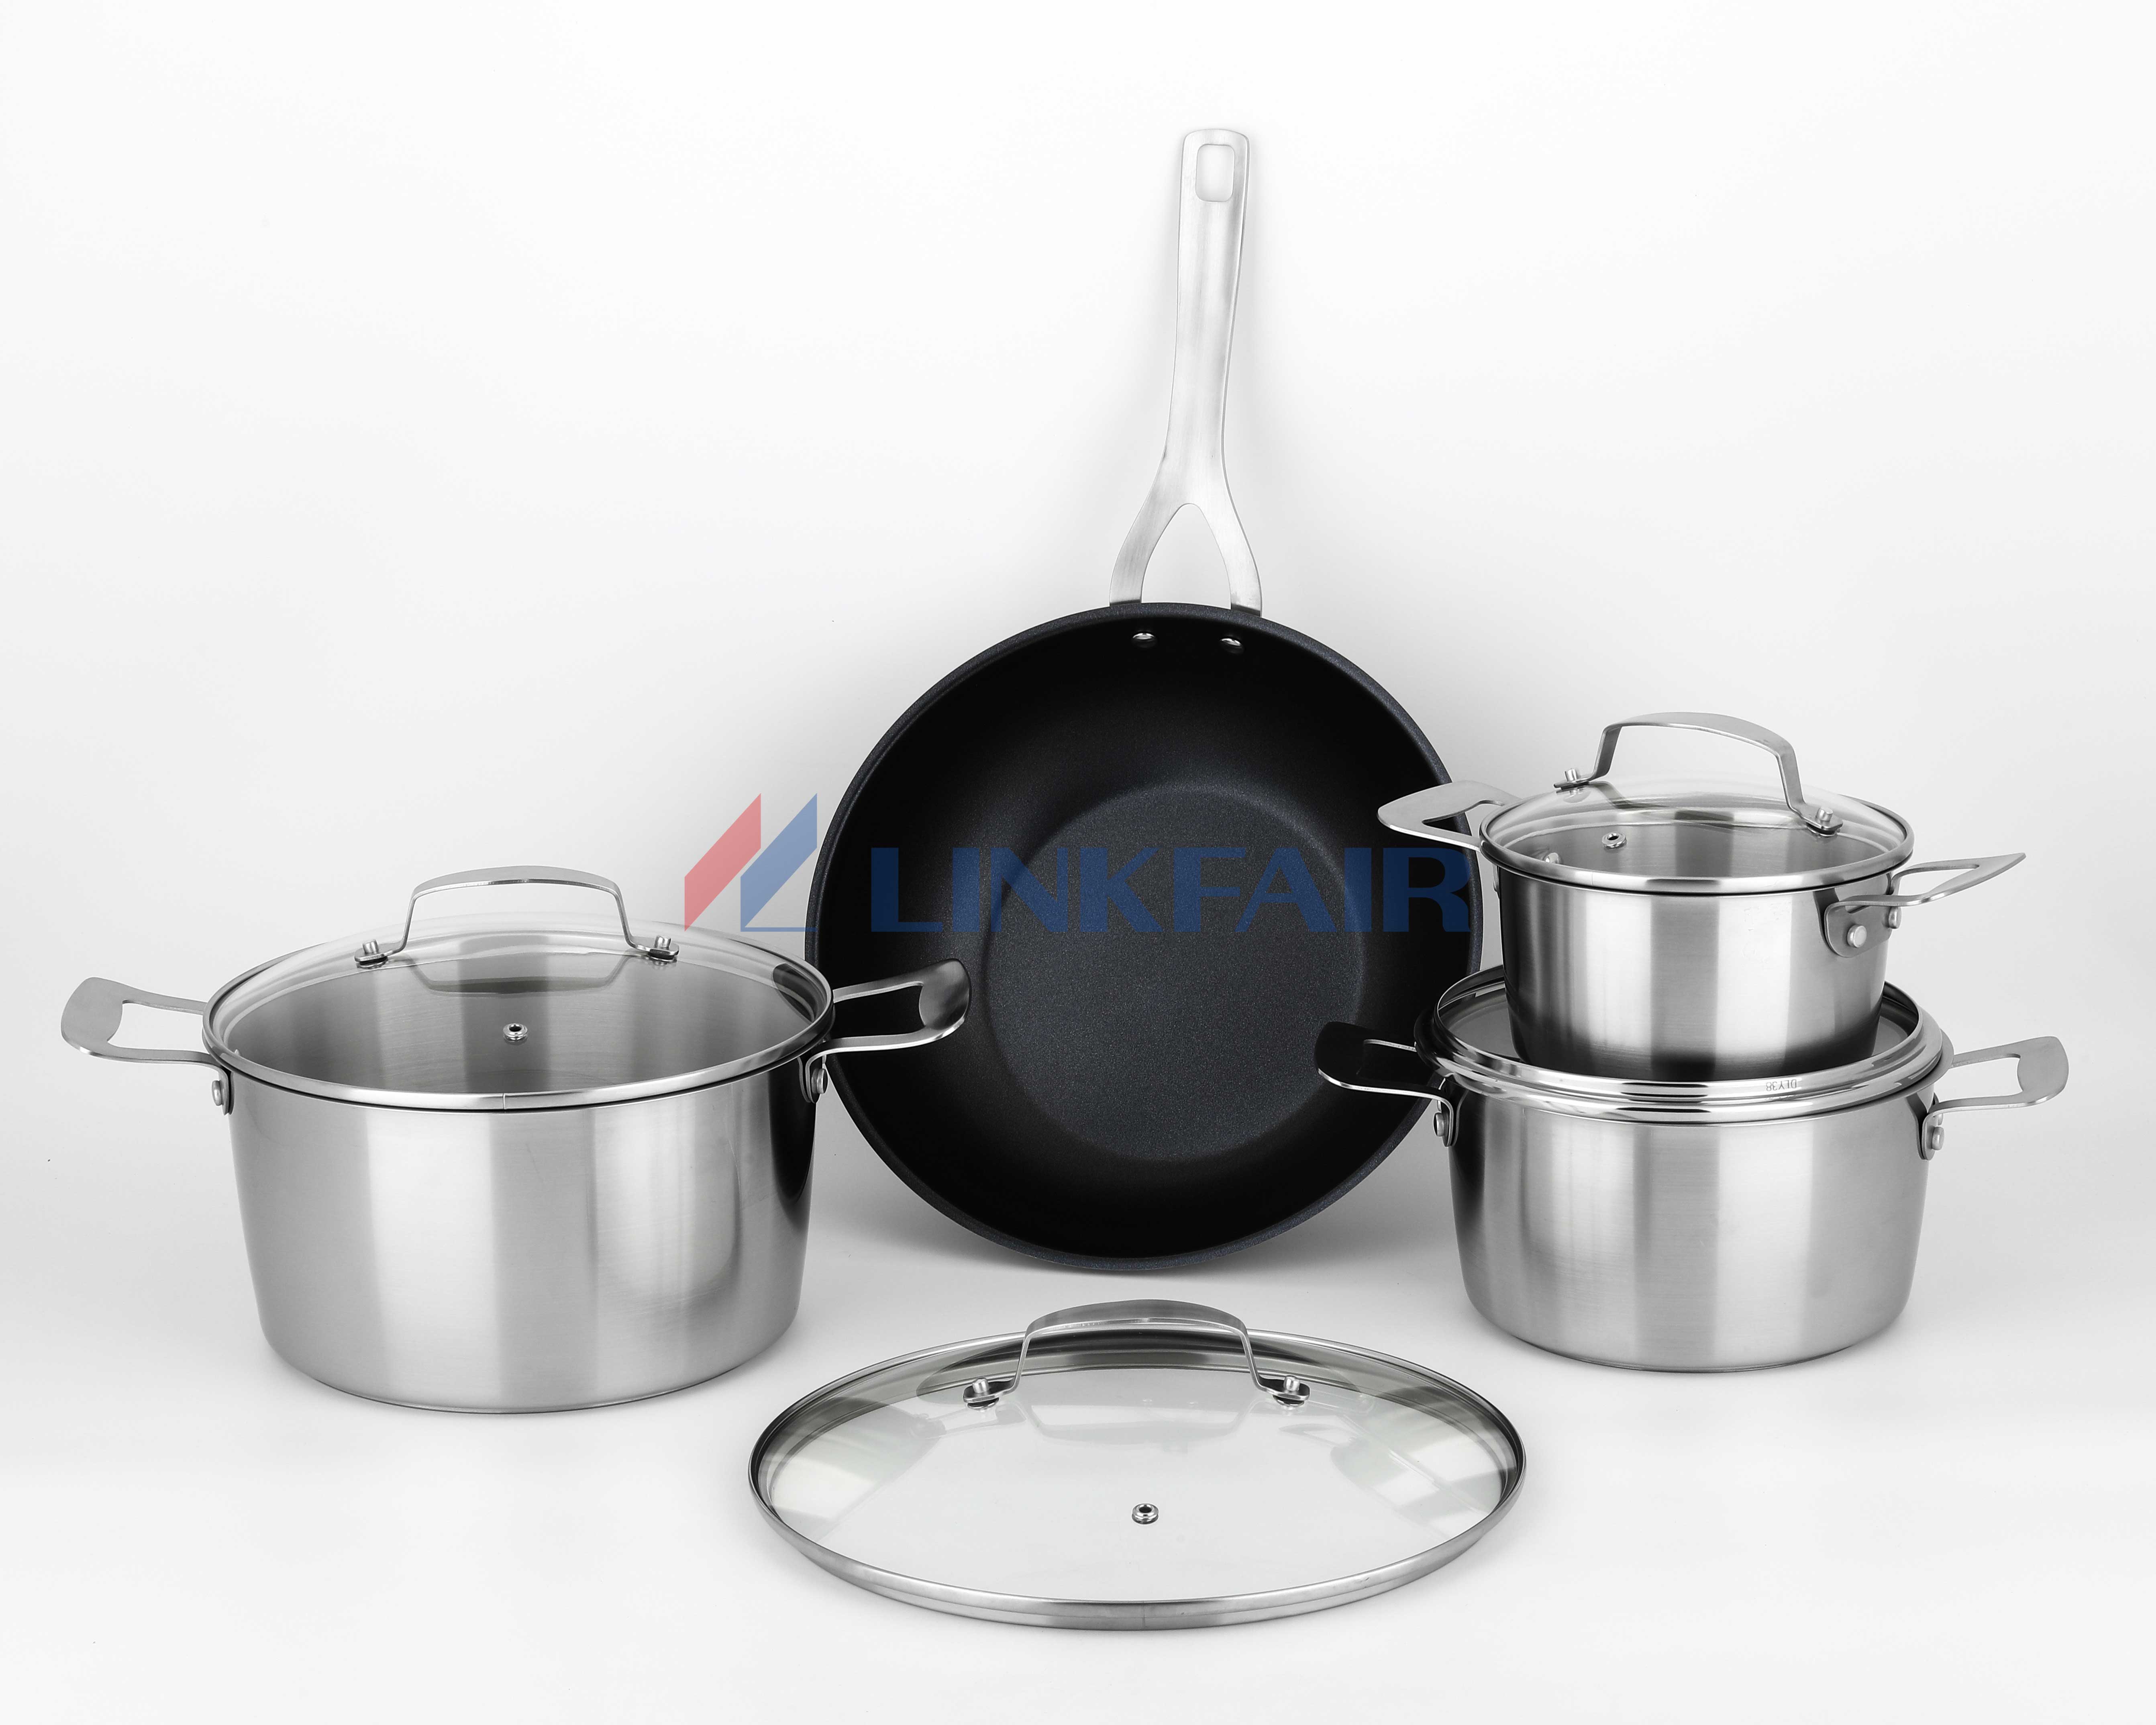 8-Piece Stainless Steel Cookware Set of Conical Shape with Sandwich Bottom